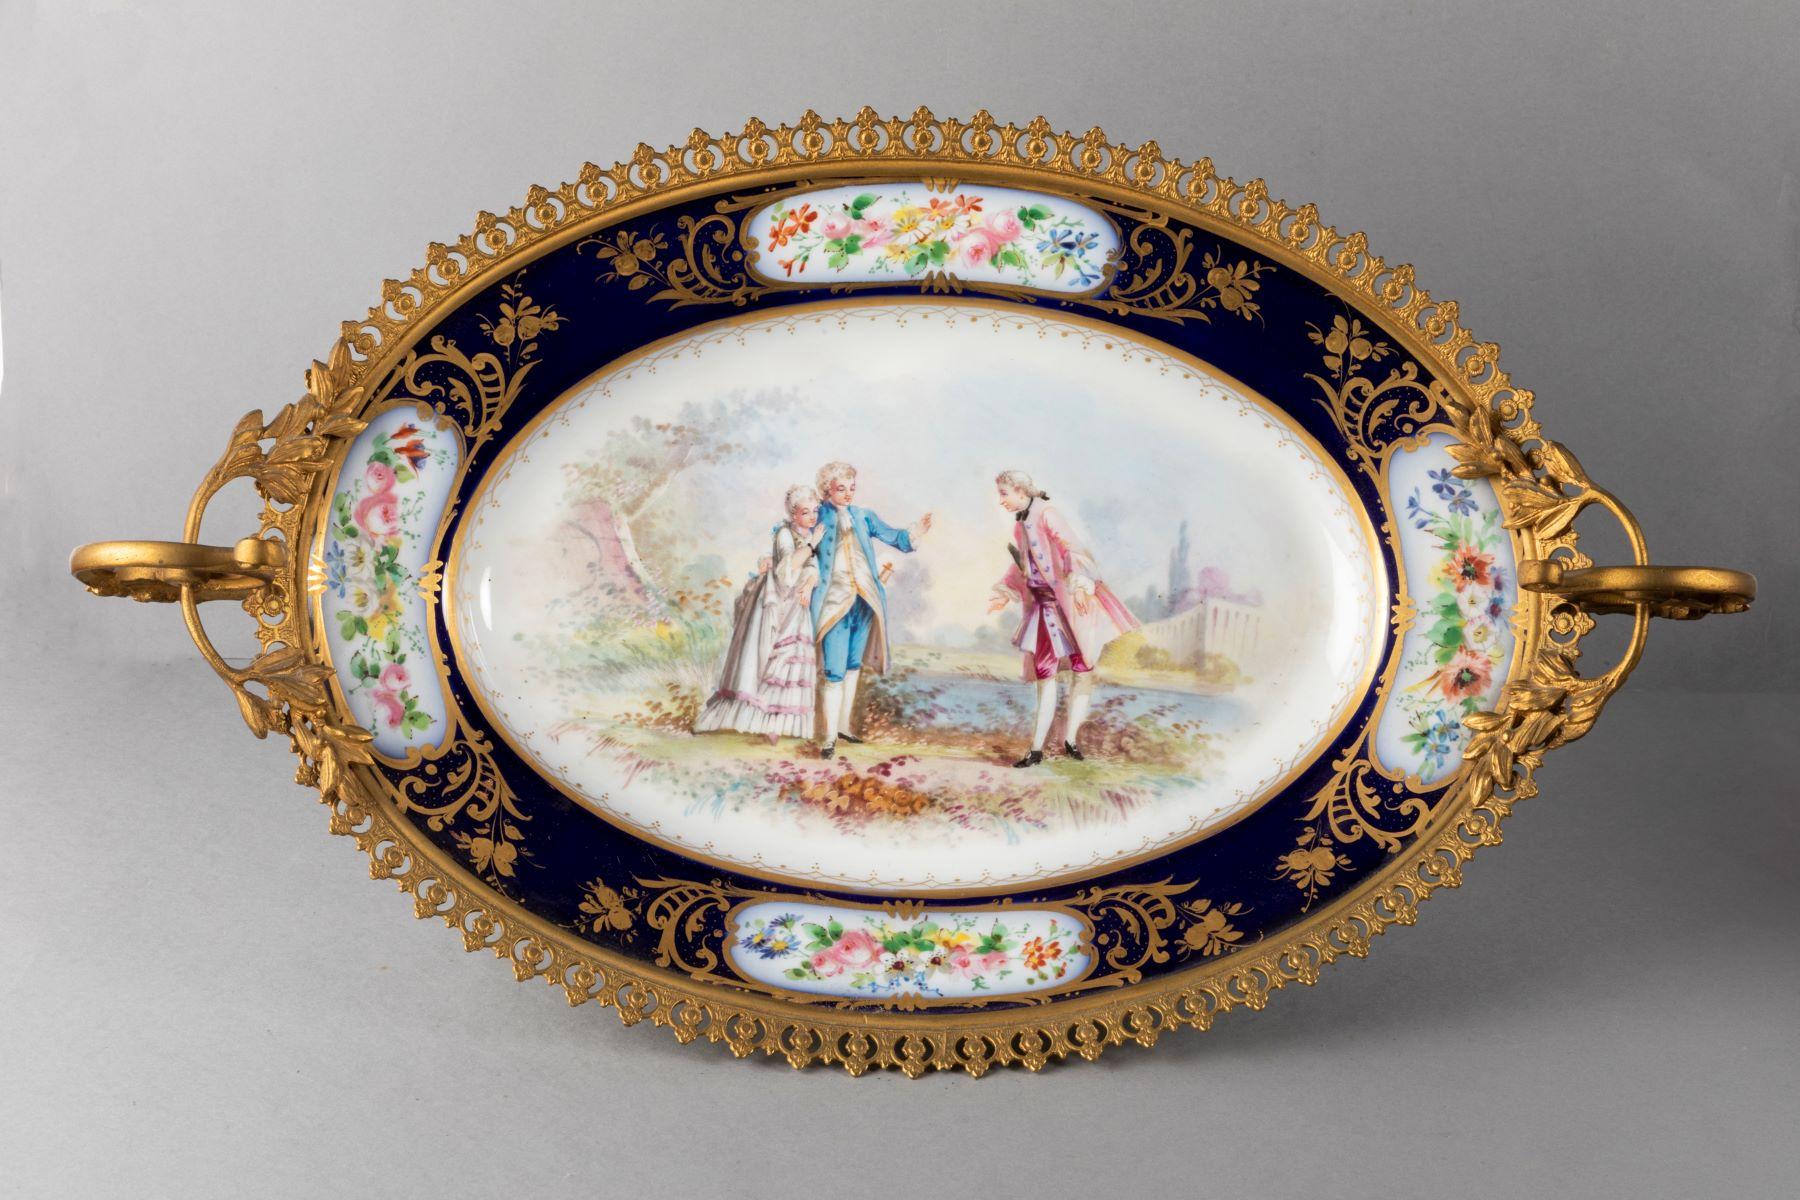 Rare sevres, gilded bronze dish, platter,
representing a Gallant Scene, a gentleman and a couple in the countryside with a castle in the background, and garlands of flowers on the edges
Most probably part of the collection of the Chateau des